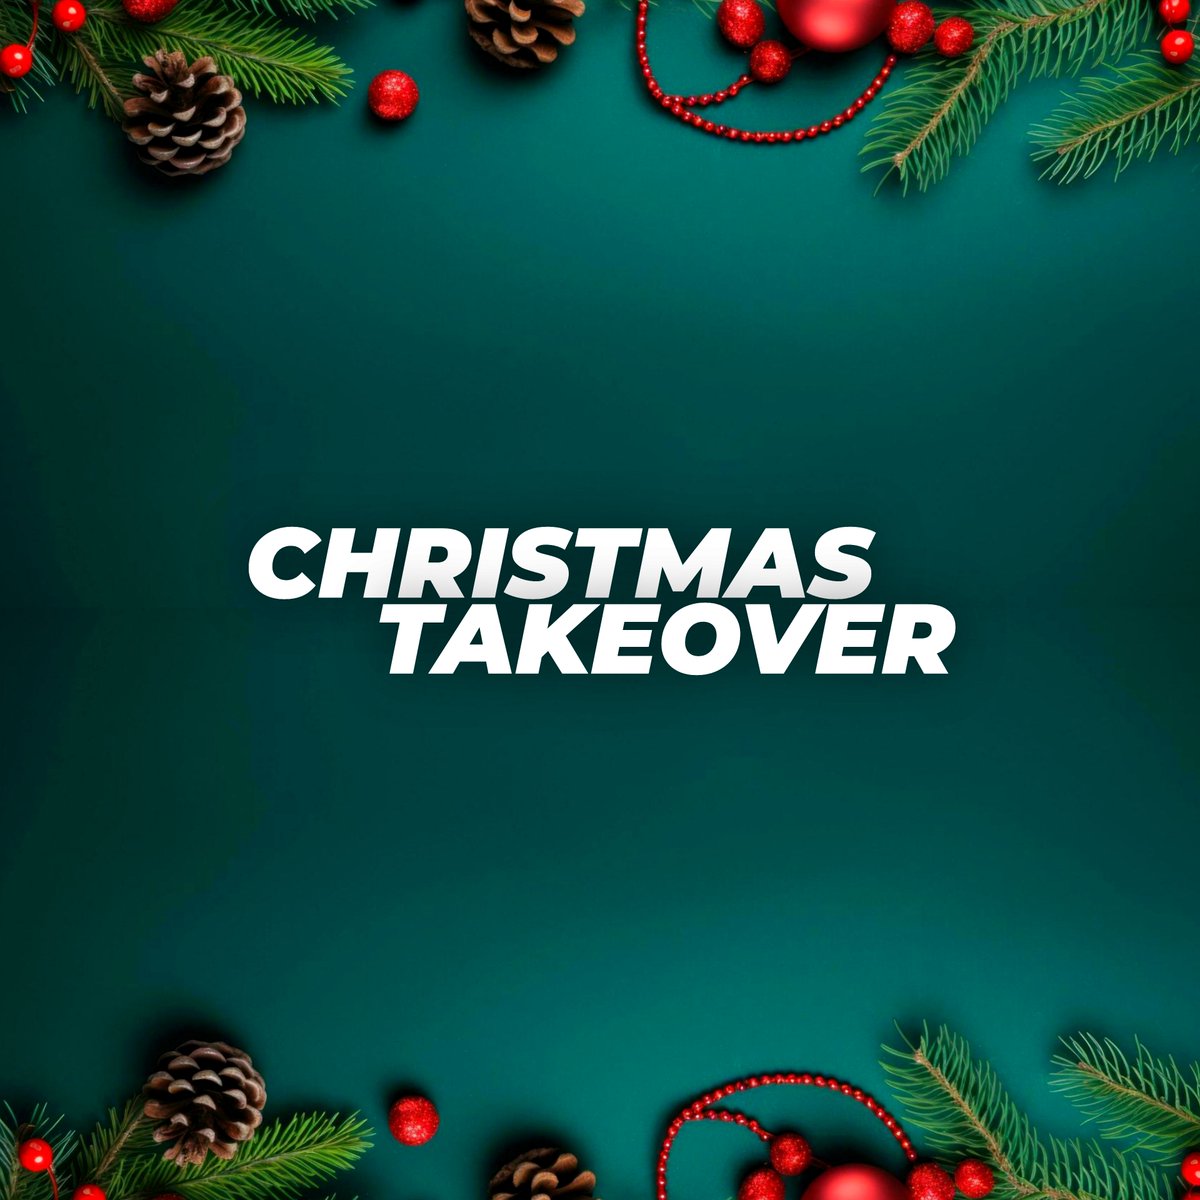 The Christmas Takeover is back for a second year! Join me and Iain Miles on Boxing Day the 26th of December from 1-3pm for the biggest festive hits and myself and David on the 27th from 1-3pm for the Afternoon Takeover on @twolochs